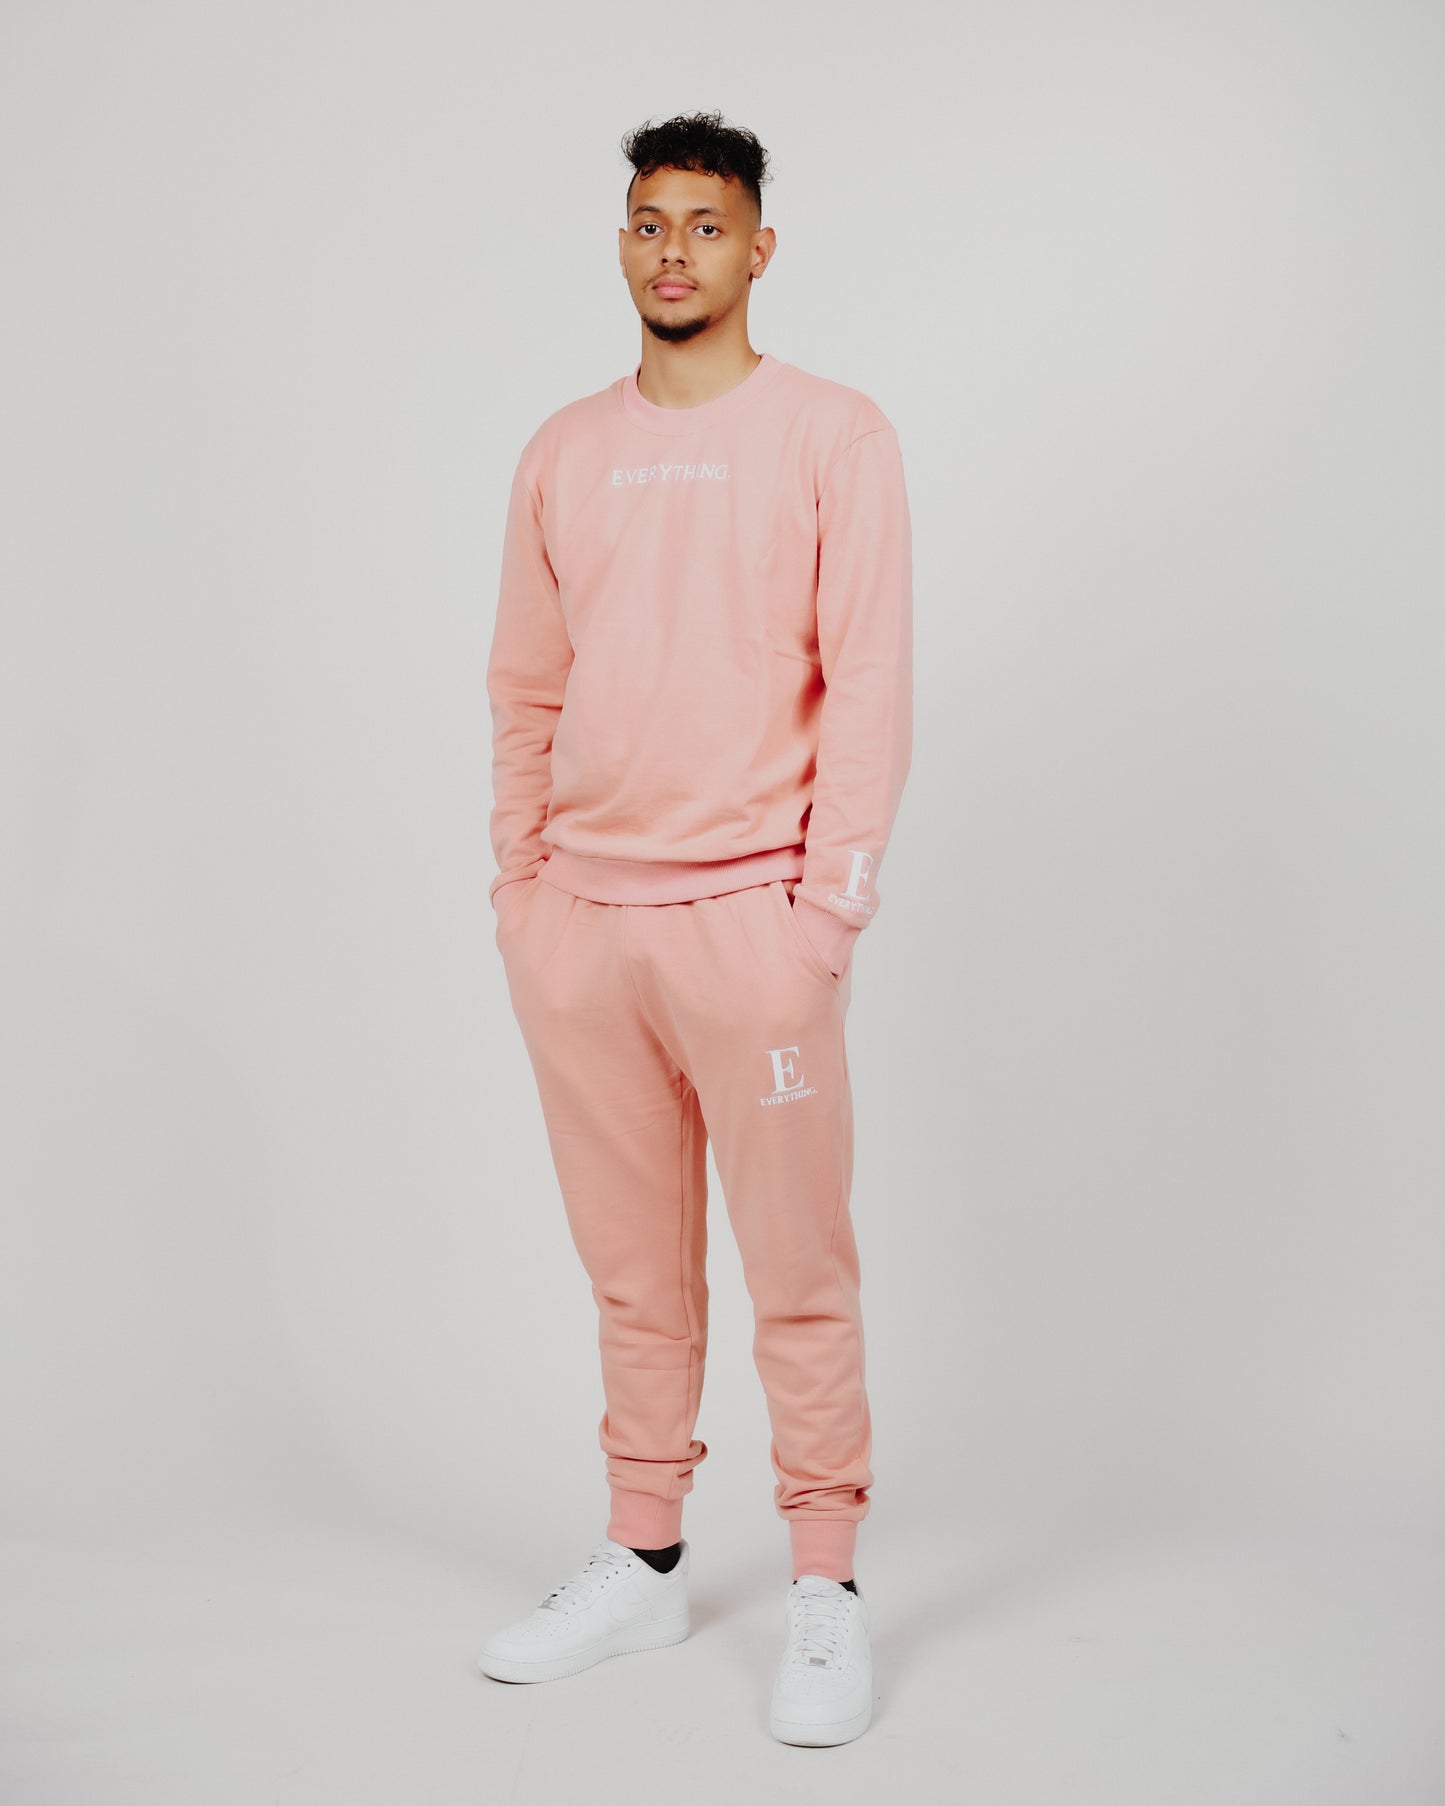 Everything Track Suit Pink